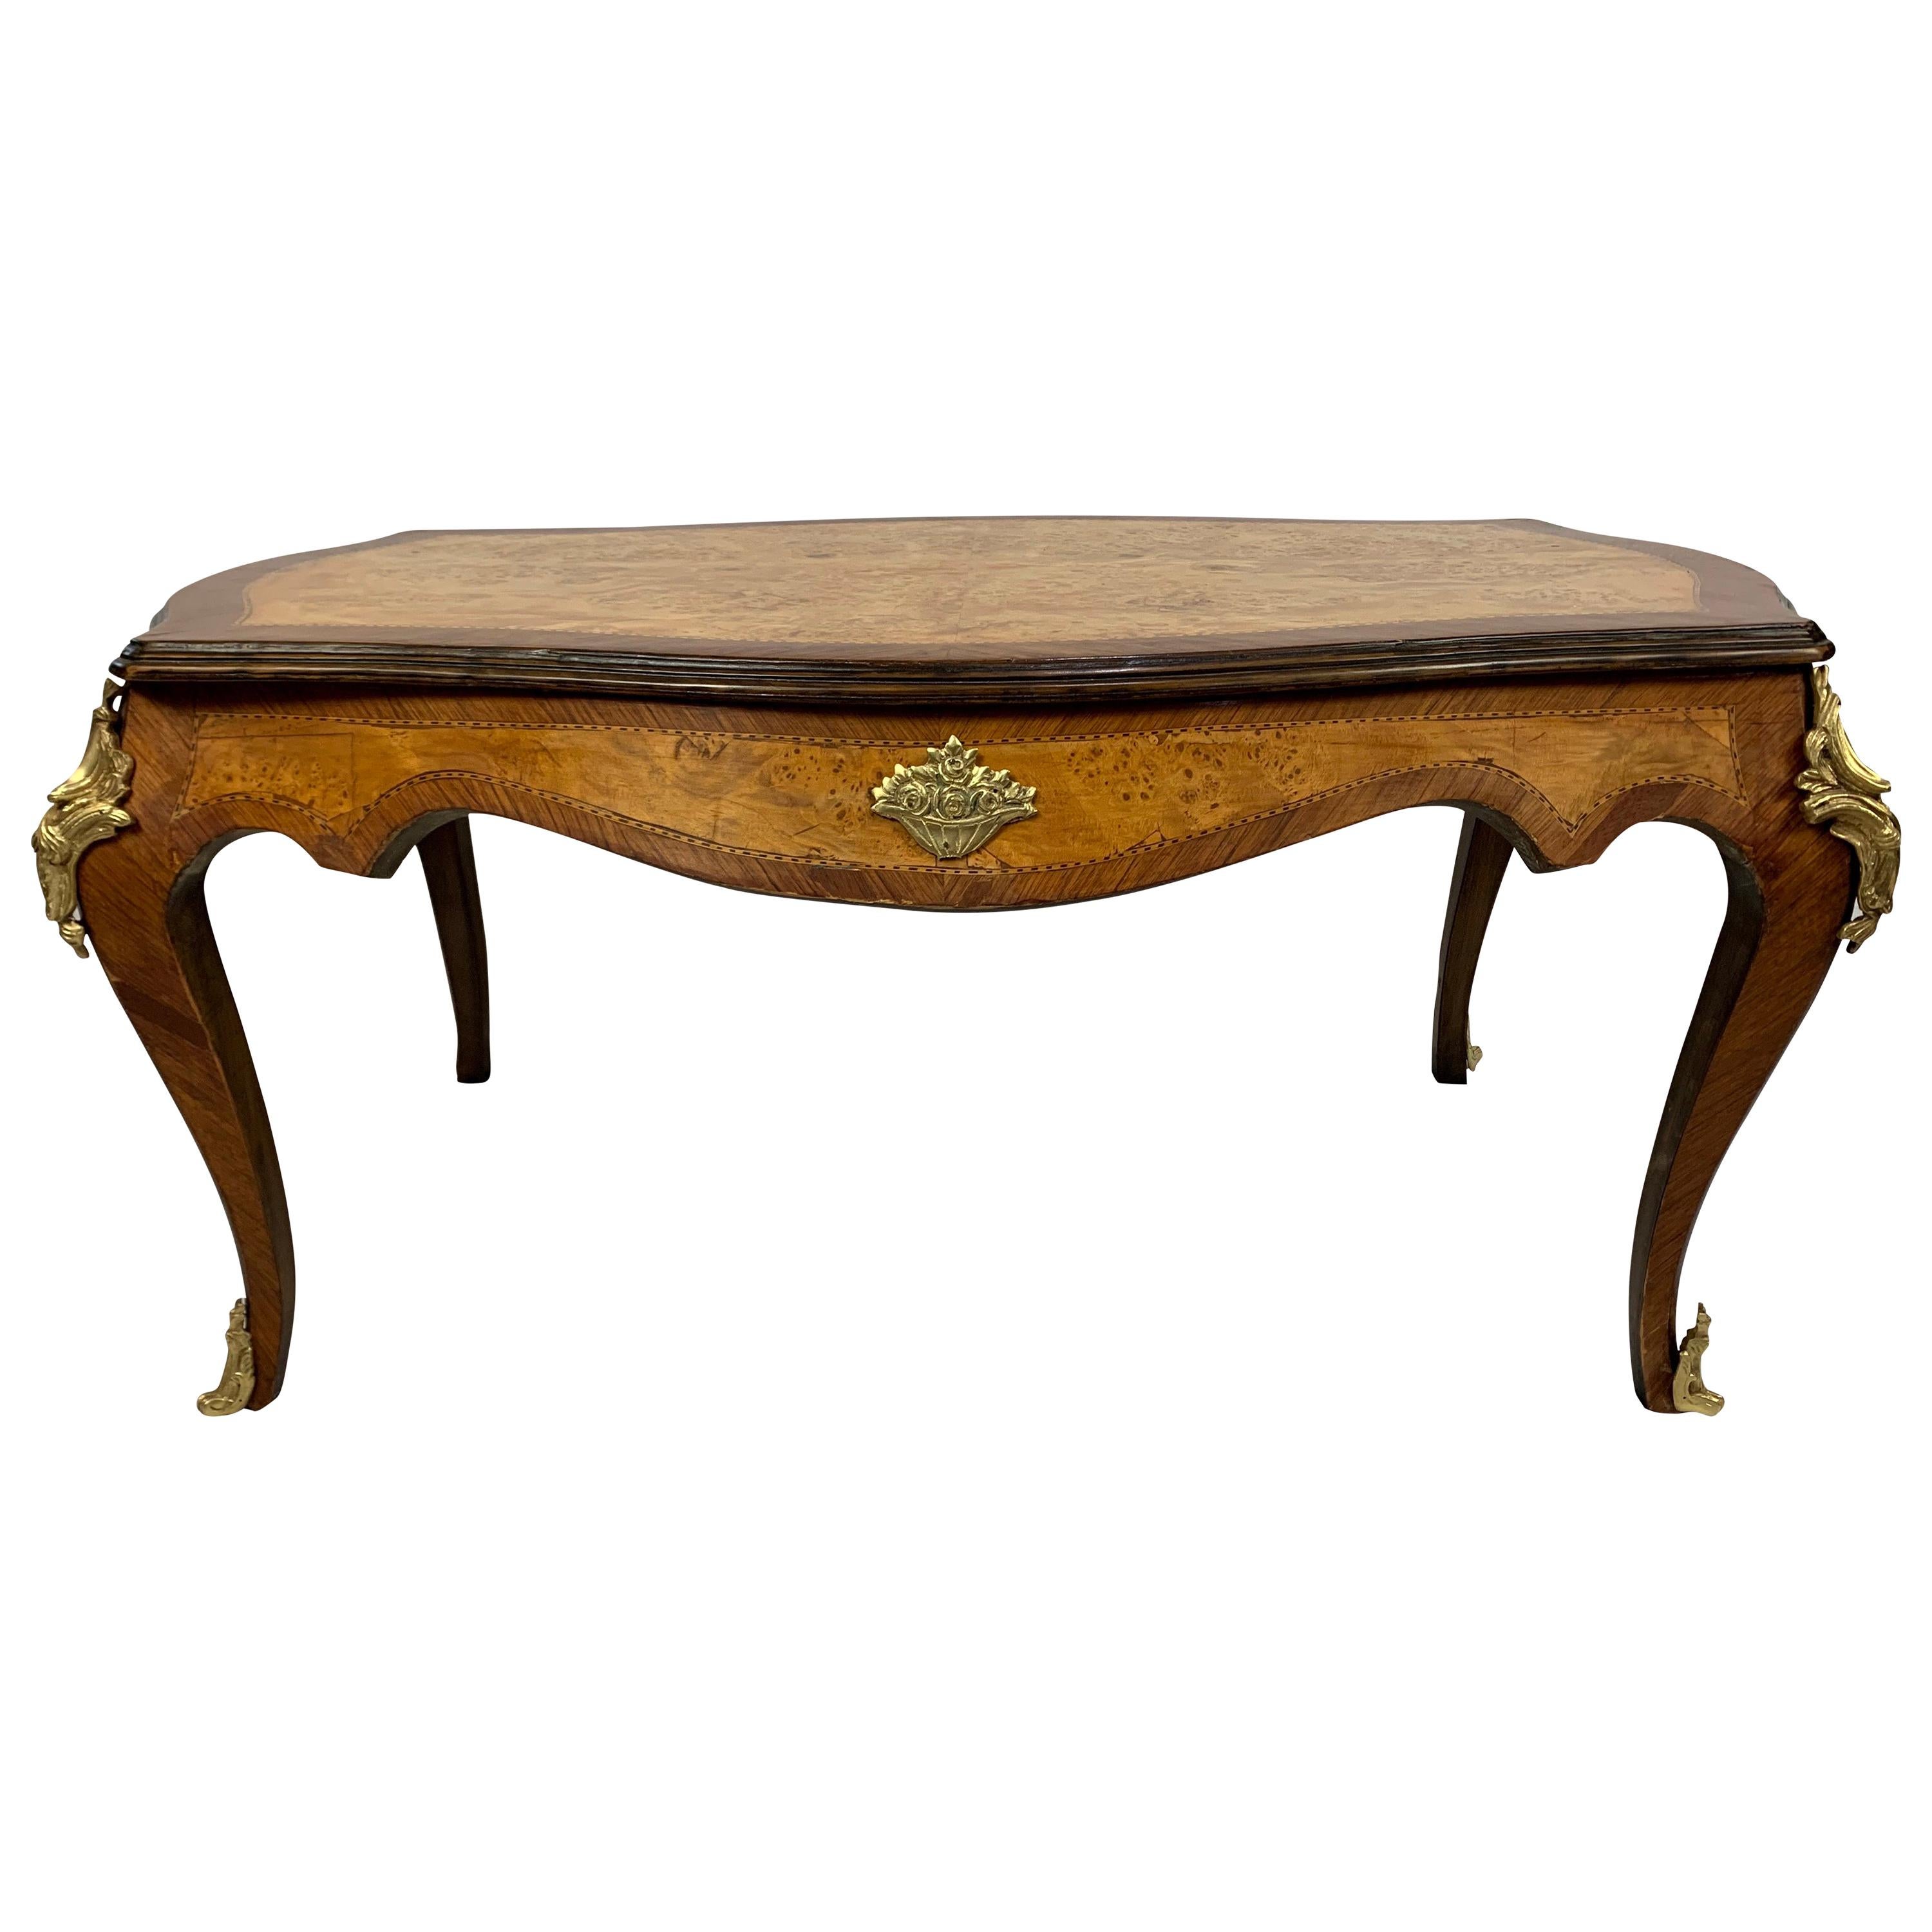 French Inlaid Burled Walnut and Gilt Bronze Mounted Coffee Table